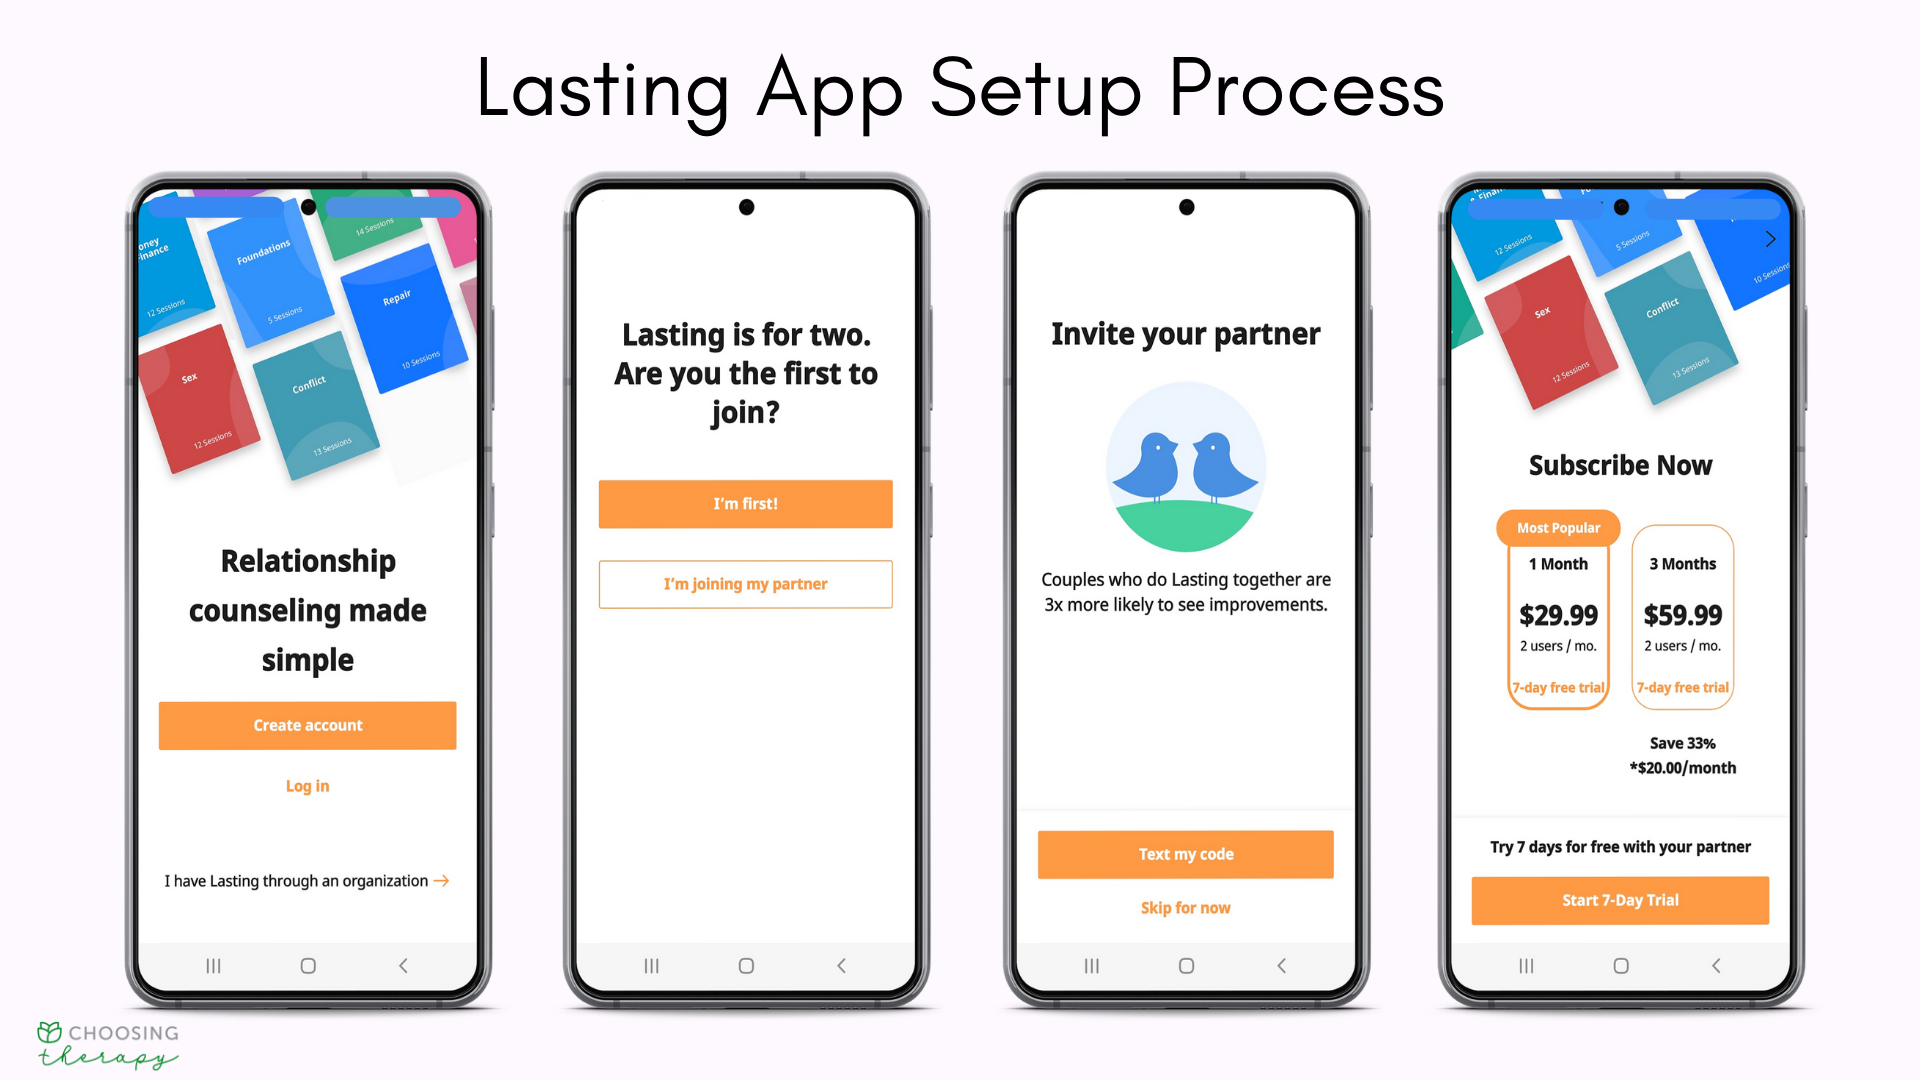 Lasting App Review 2022 - Image of the setup process with the Lasting app